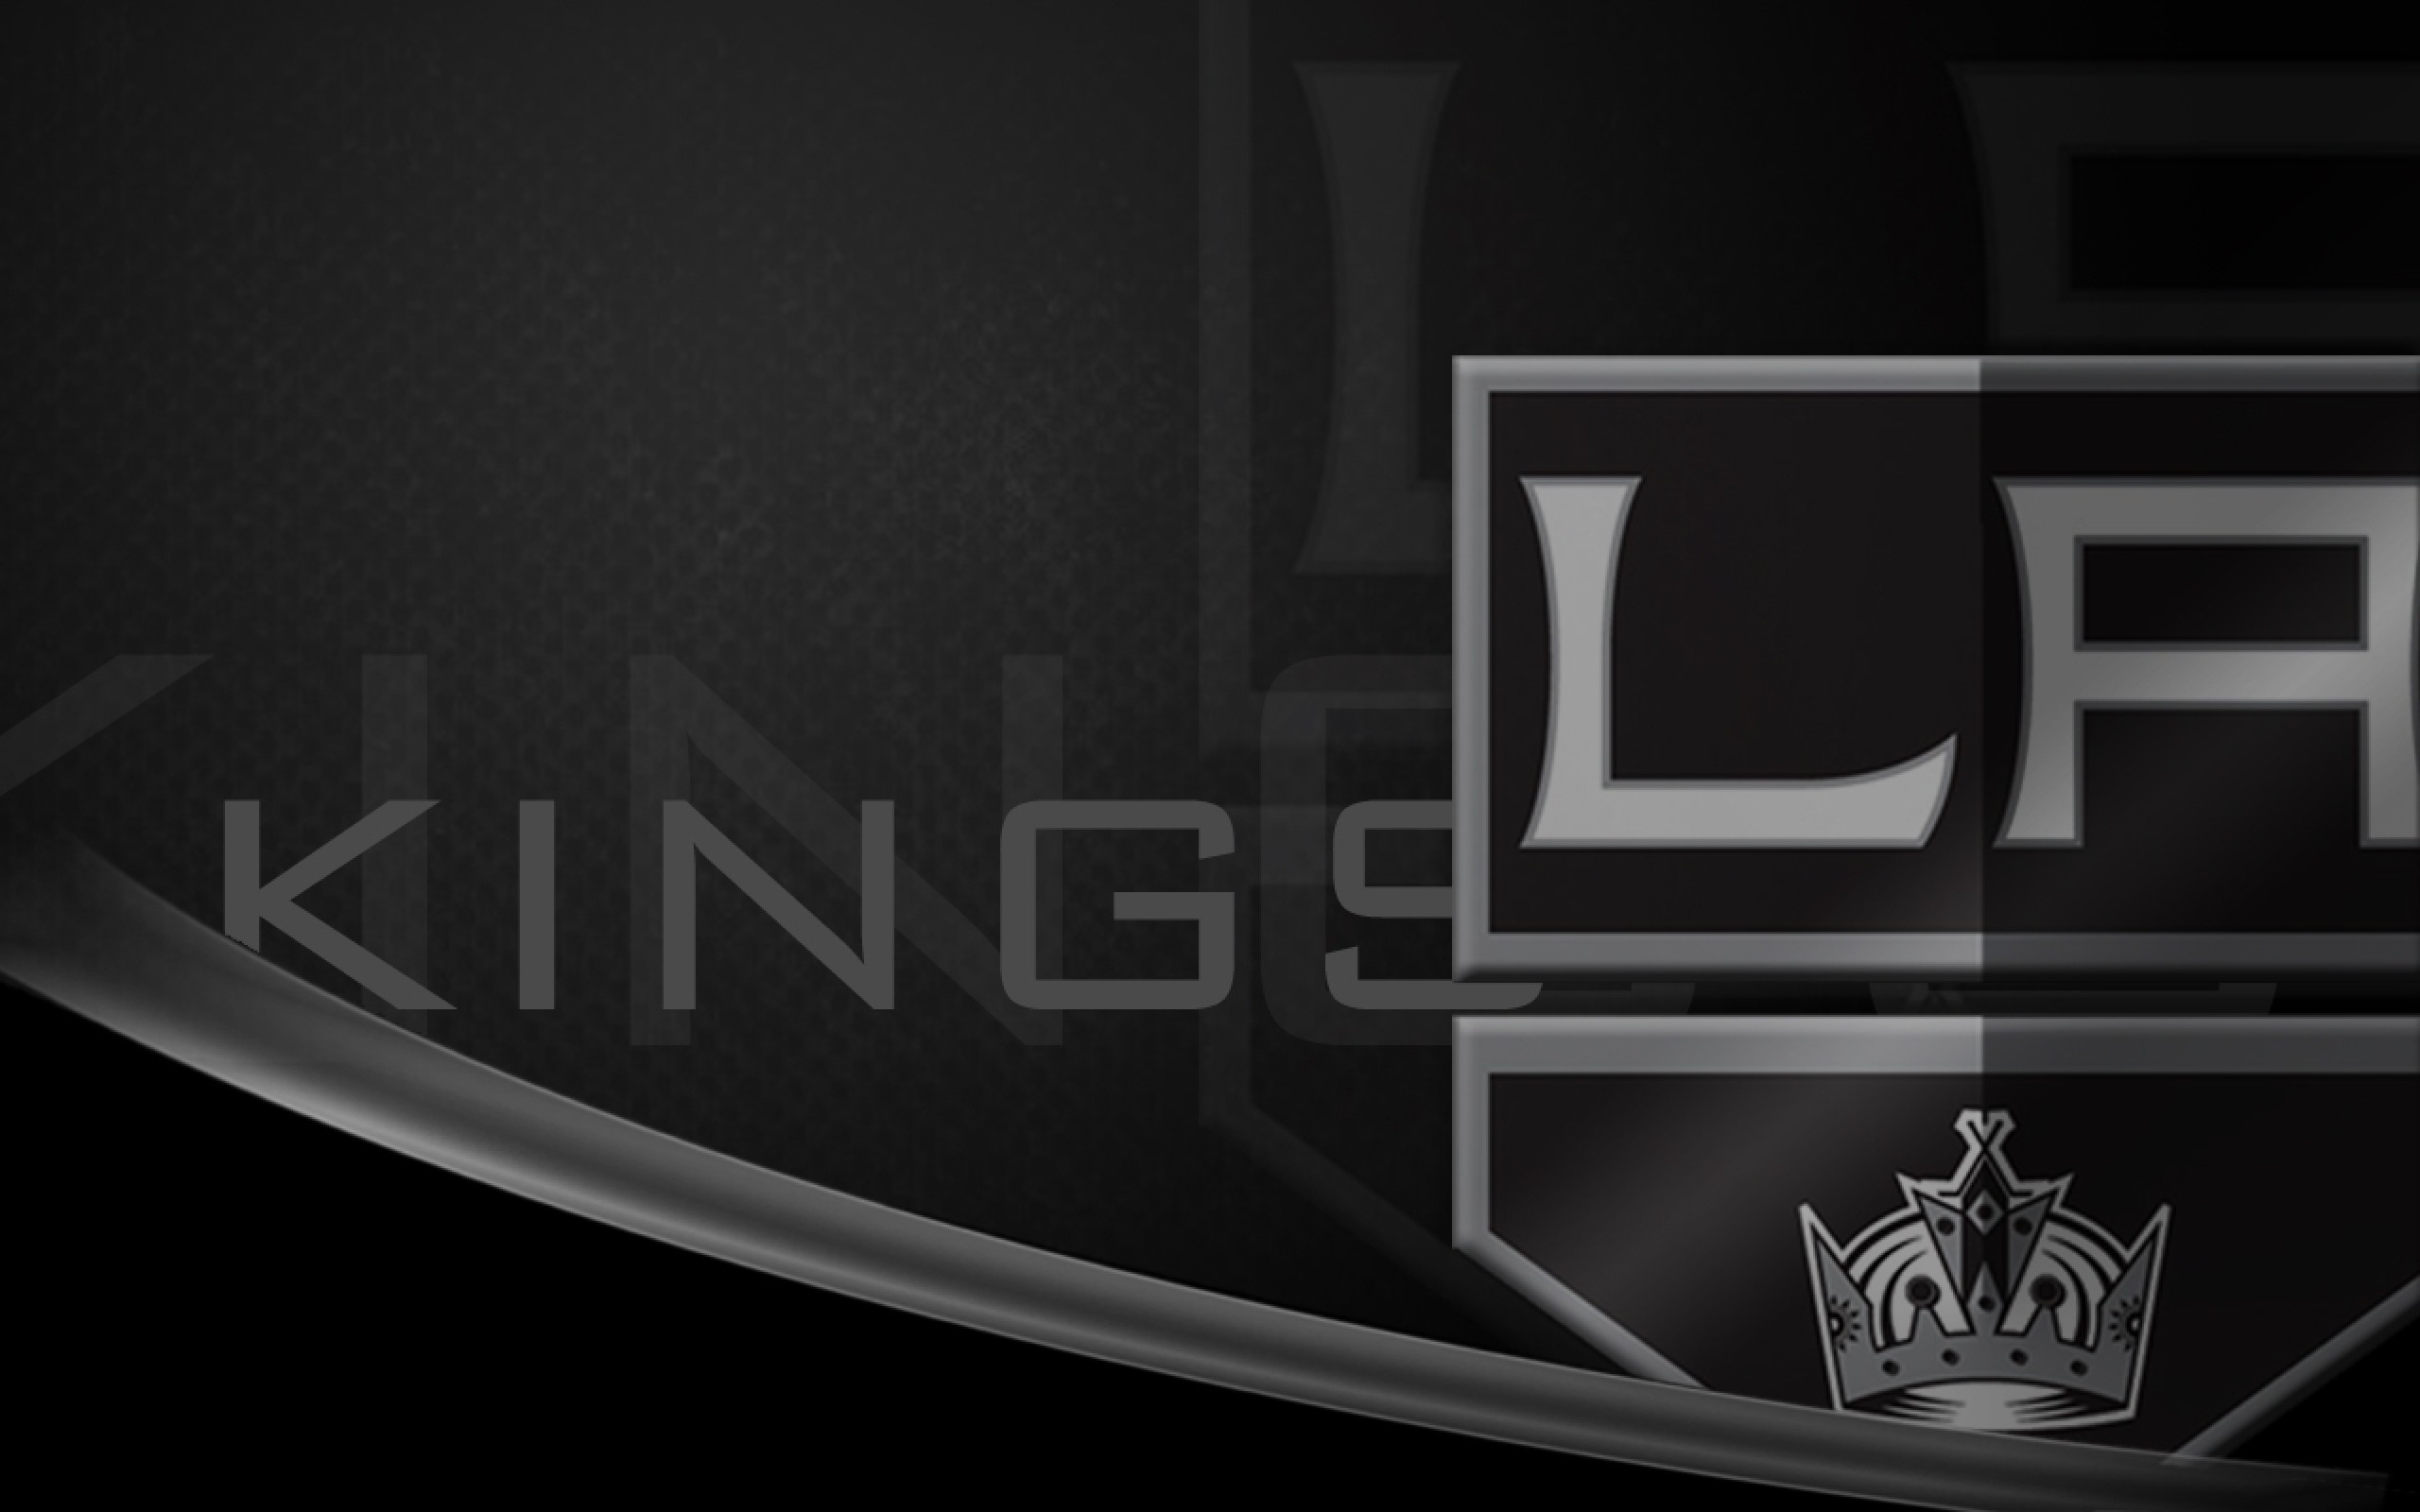 2560x1600 Download the following La Kings 20021 image by clicking the orange button  positioned underneath the "Download Wallpaper" section.